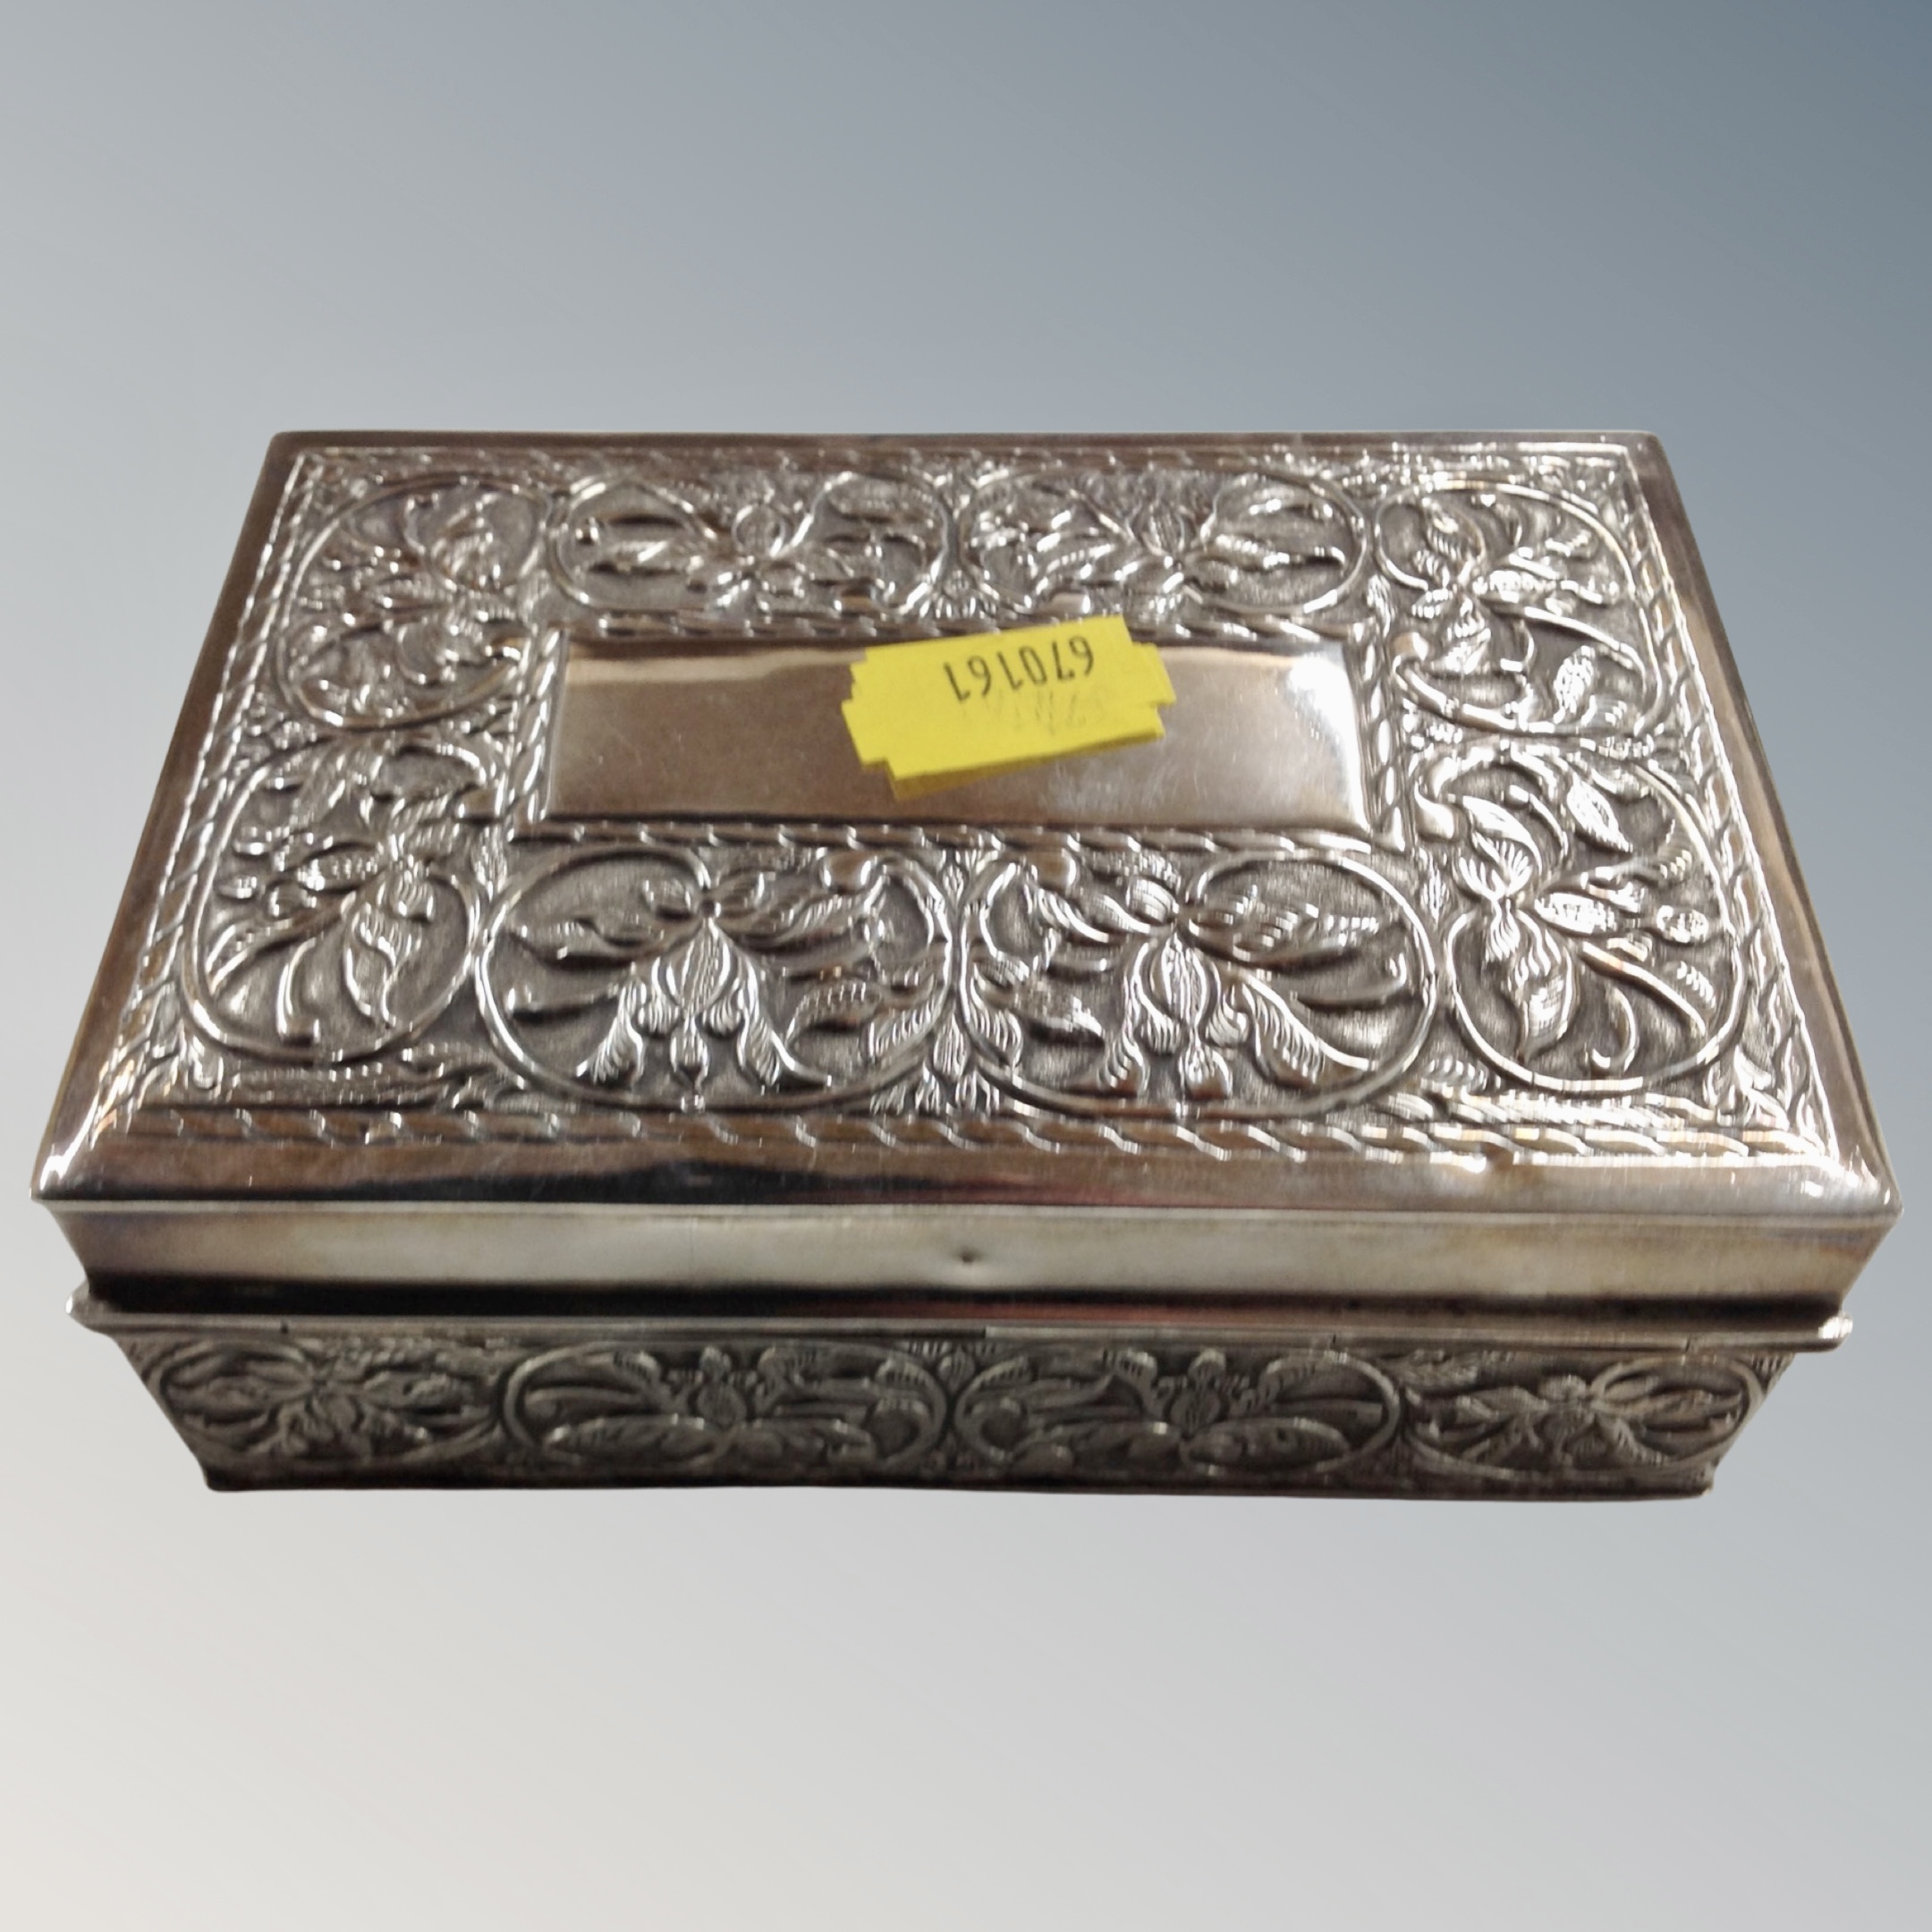 A middle Eastern embossed silver cigarette box